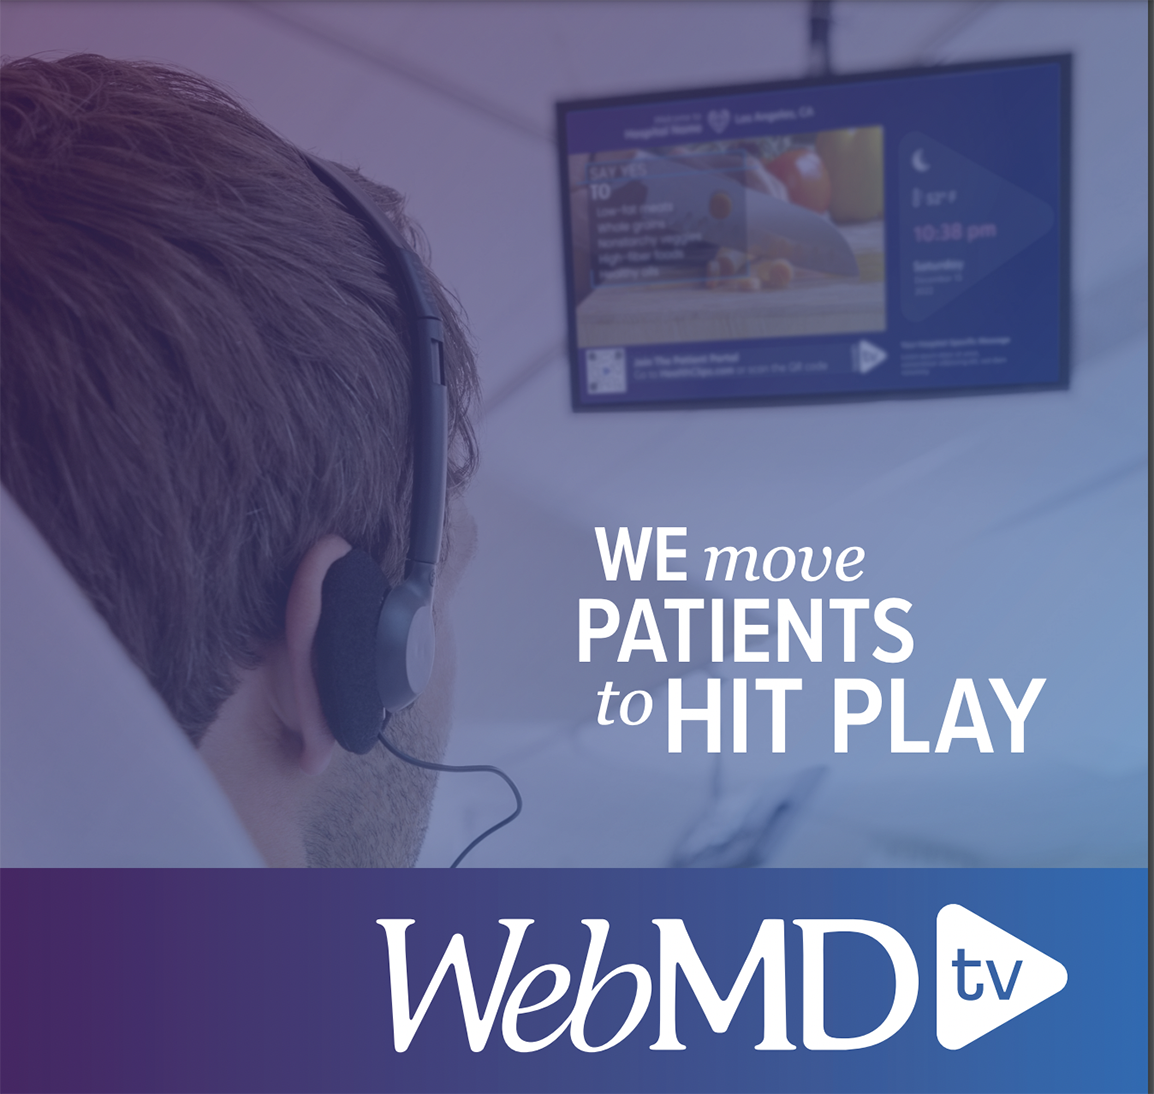 In-Hospital TV ChannelsHCP-recommended educational content is available for viewing at patients' bedsides and in common areas of hospitals. The in-room TV education is prescribed to patients by clinicians.